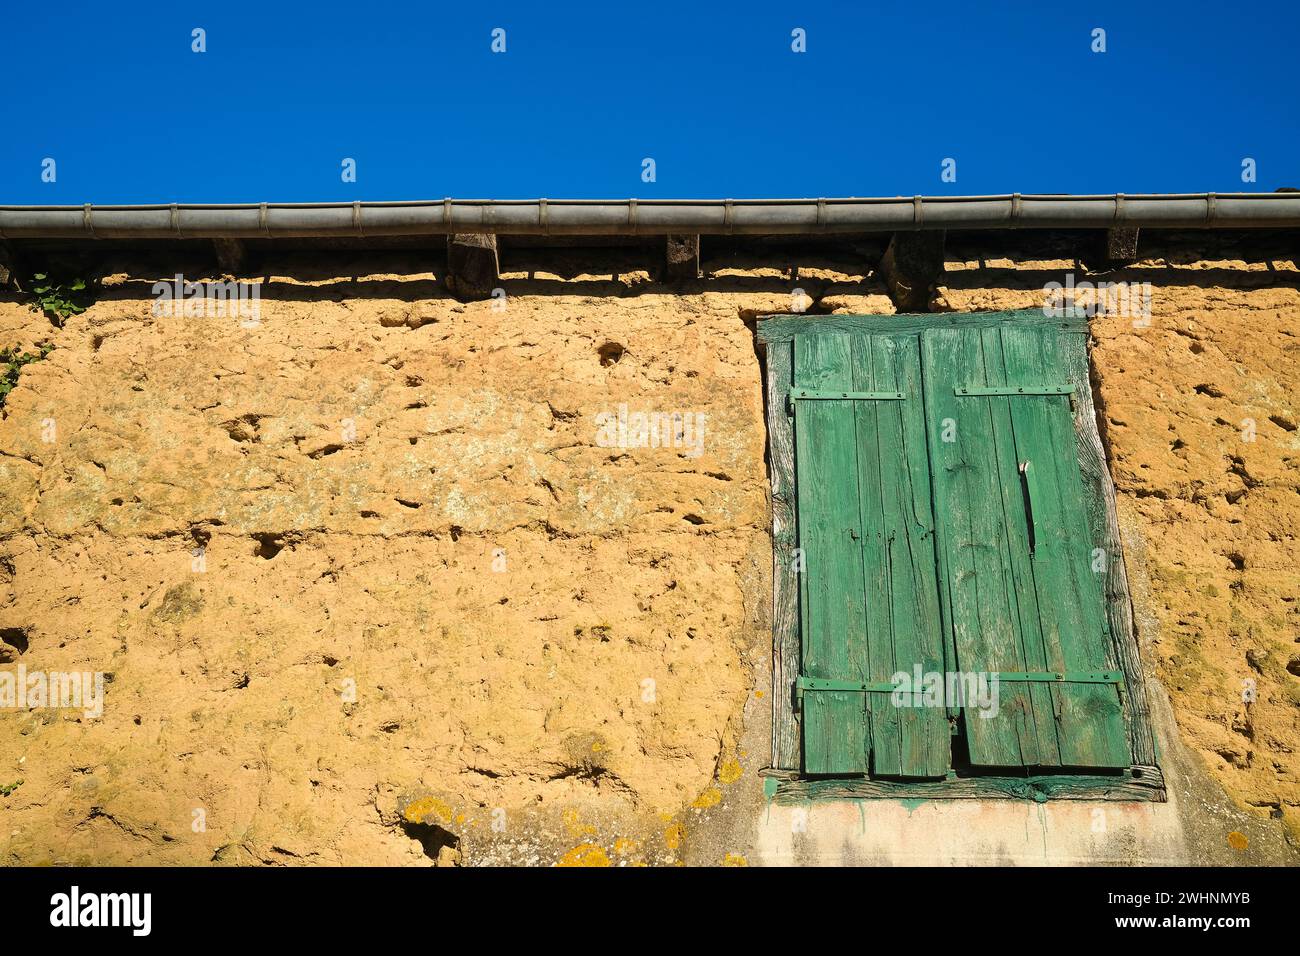 Rustic rural closed old timber window shutter Stock Photo